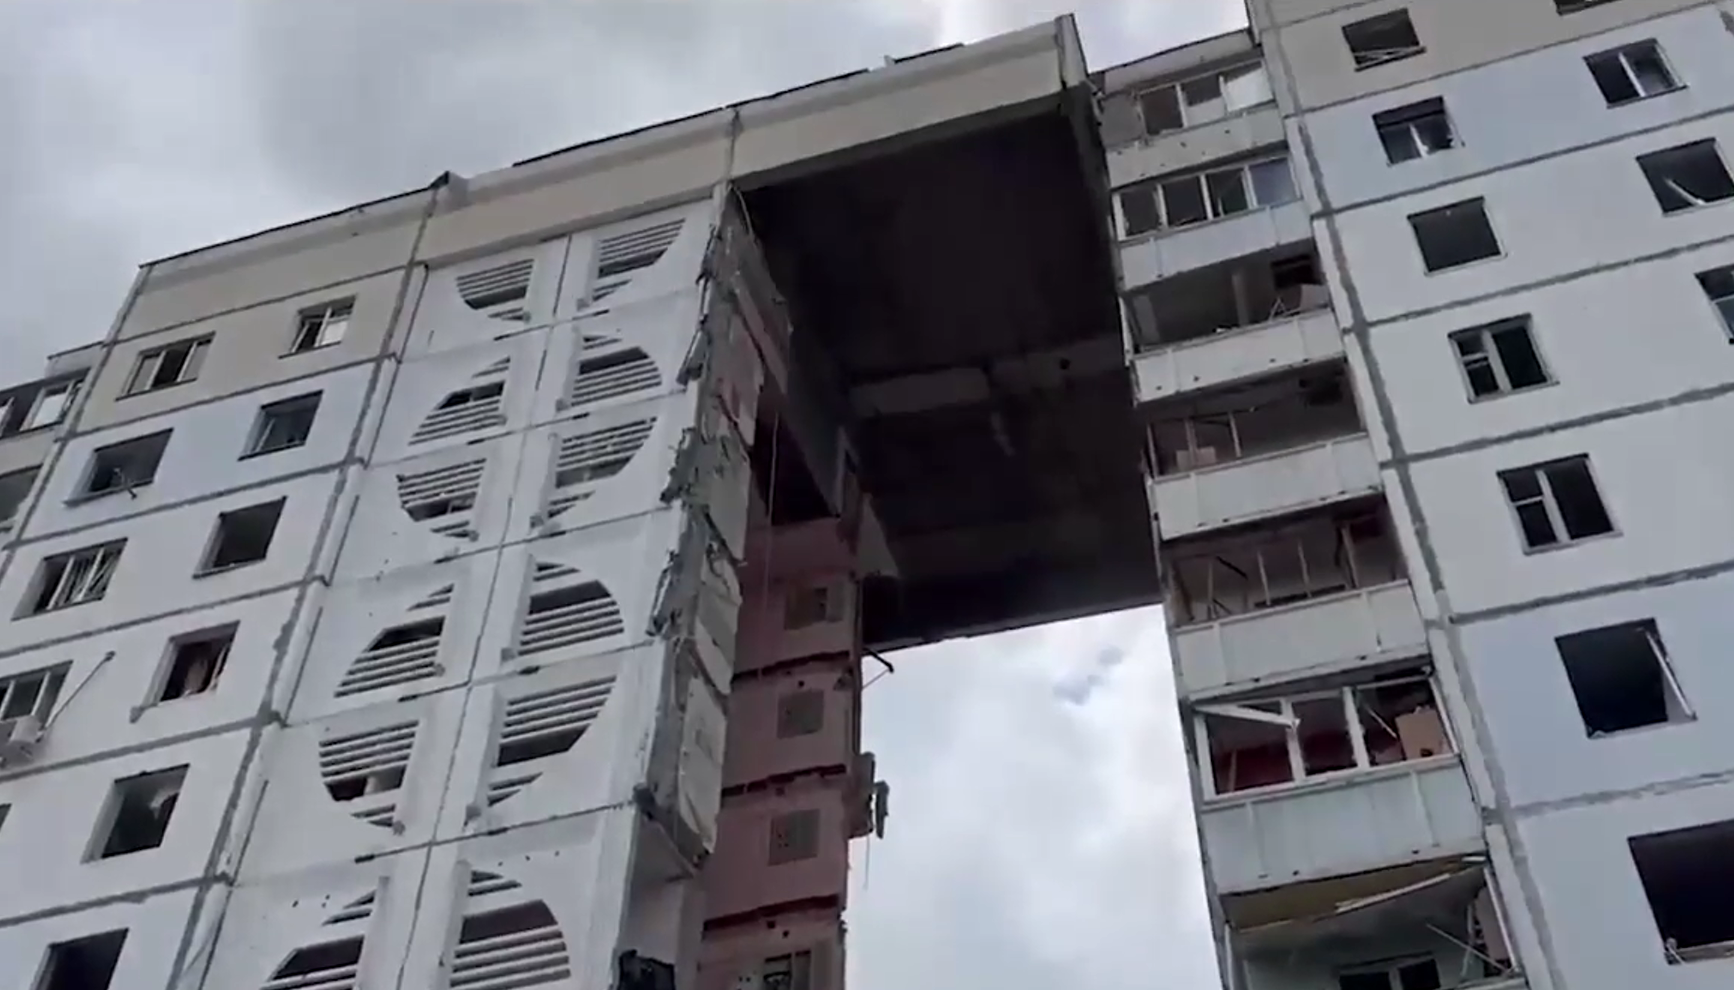 Russia's Tragedy Strikes: Deadly Collapse of Apartment Building in Belgorod, Leaves Multiple Casualties